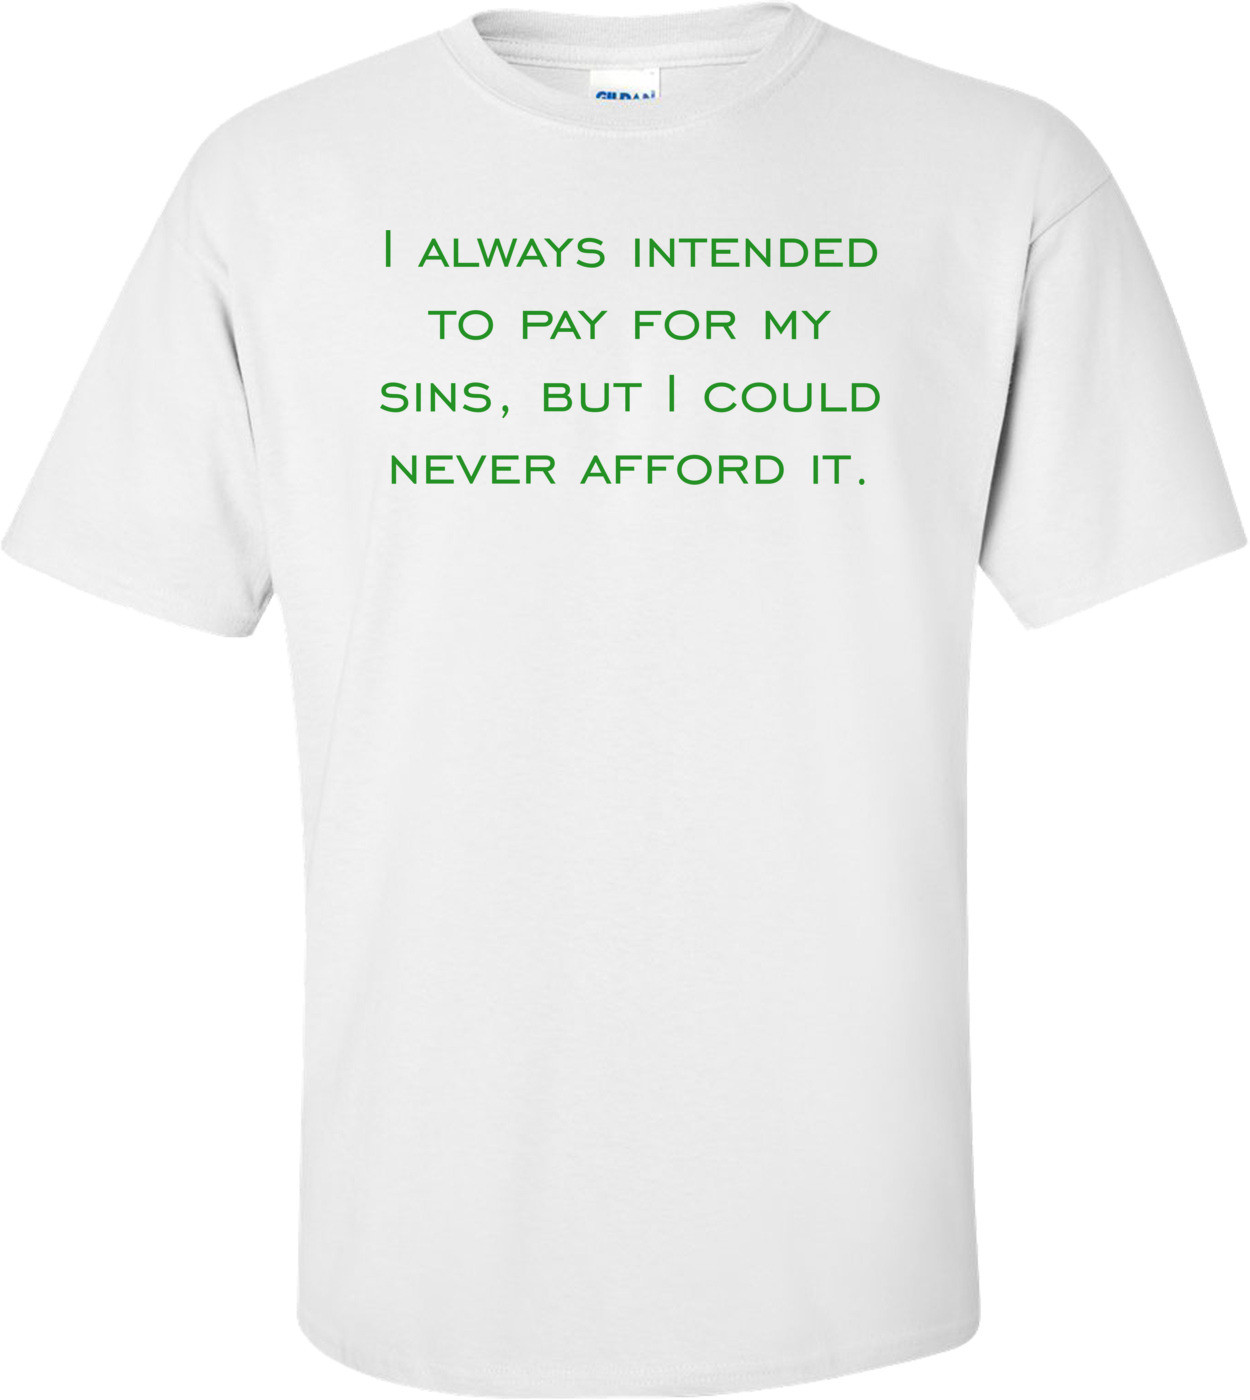 I always intended to pay for my sins, but I could never afford it. Shirt